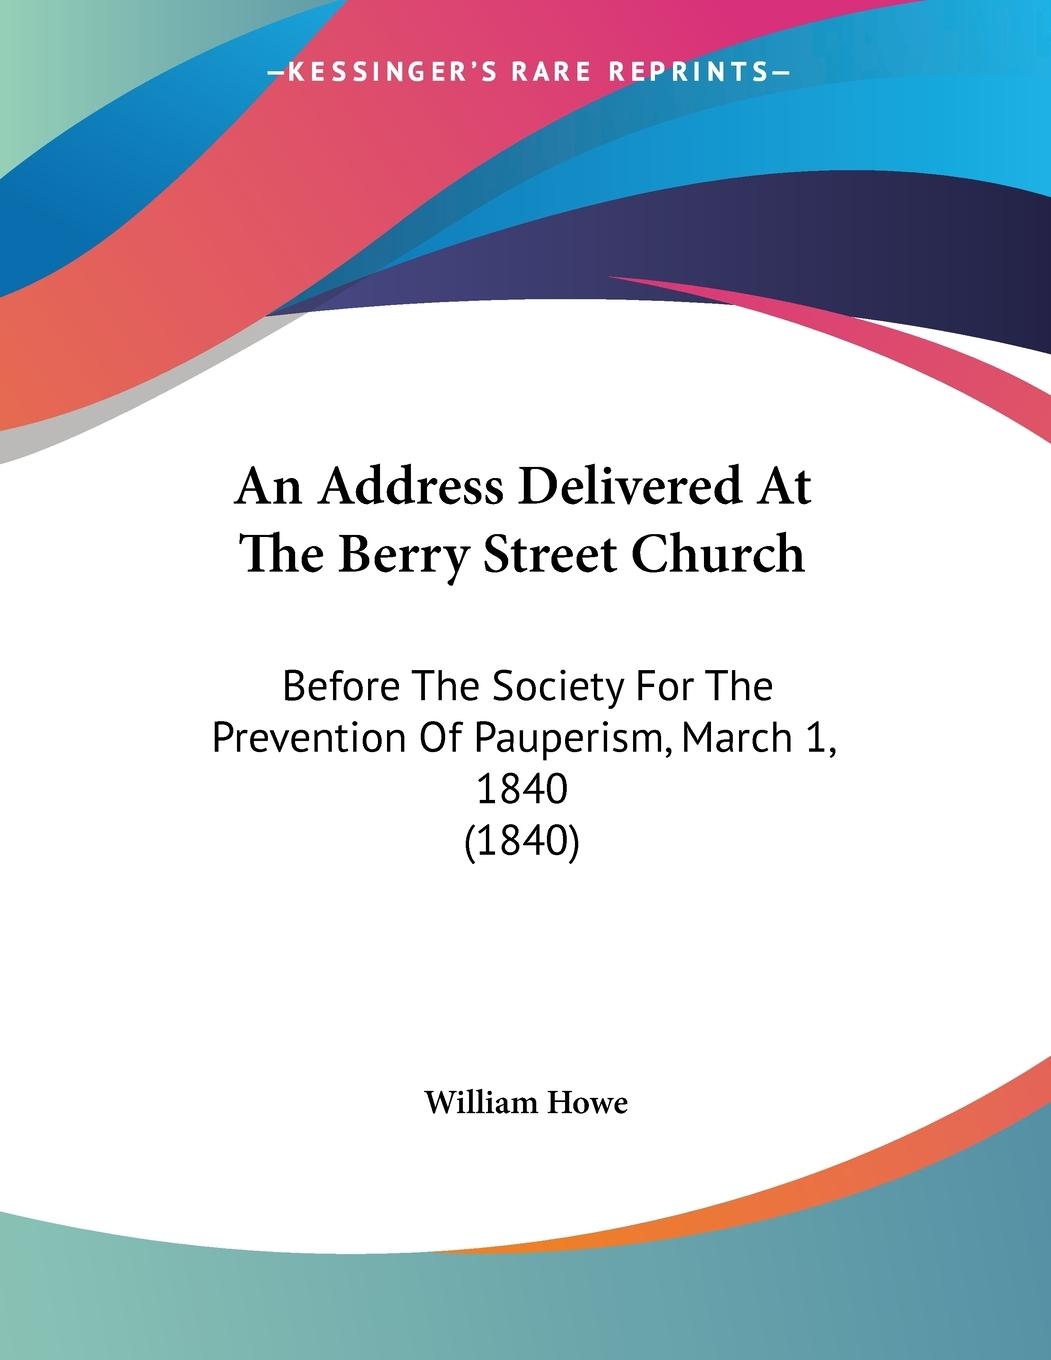 An Address Delivered At The Berry Street Church - Howe, William